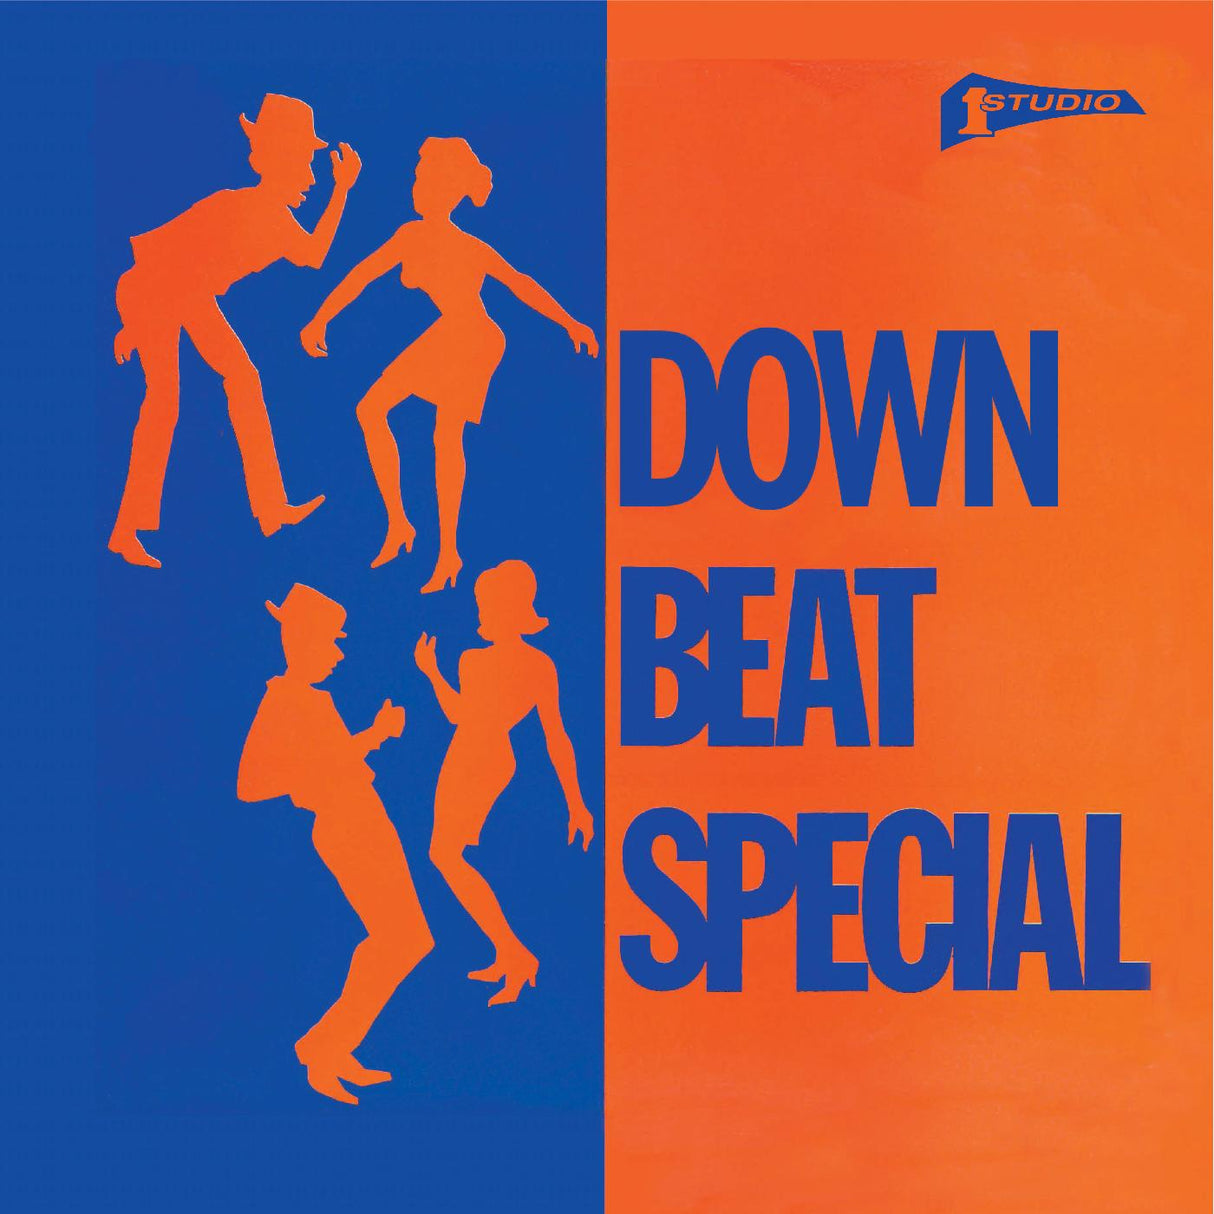 Studio One Down Beat Special (Expanded Edition) [CD]